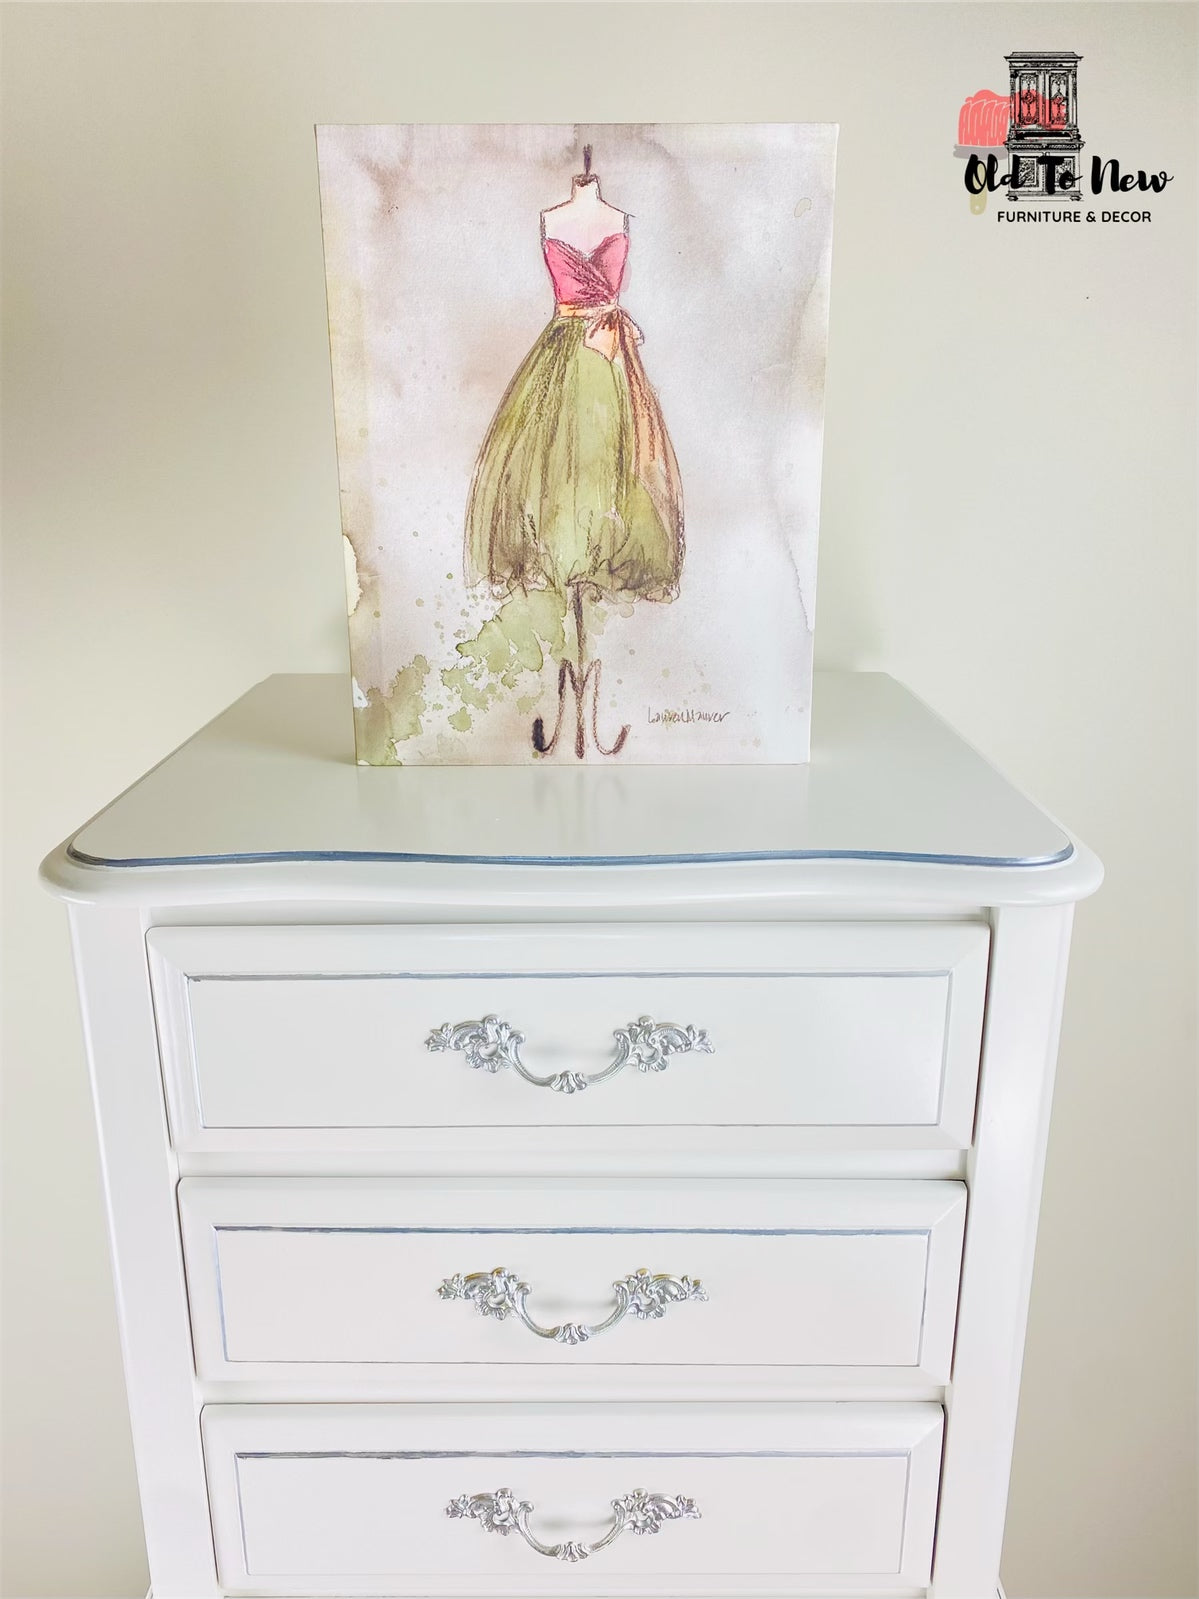 Gorgeous French Provincial 7 Drawer Baronet Dresser Painted White with Victorian Lace from Fusion Mineral Paint